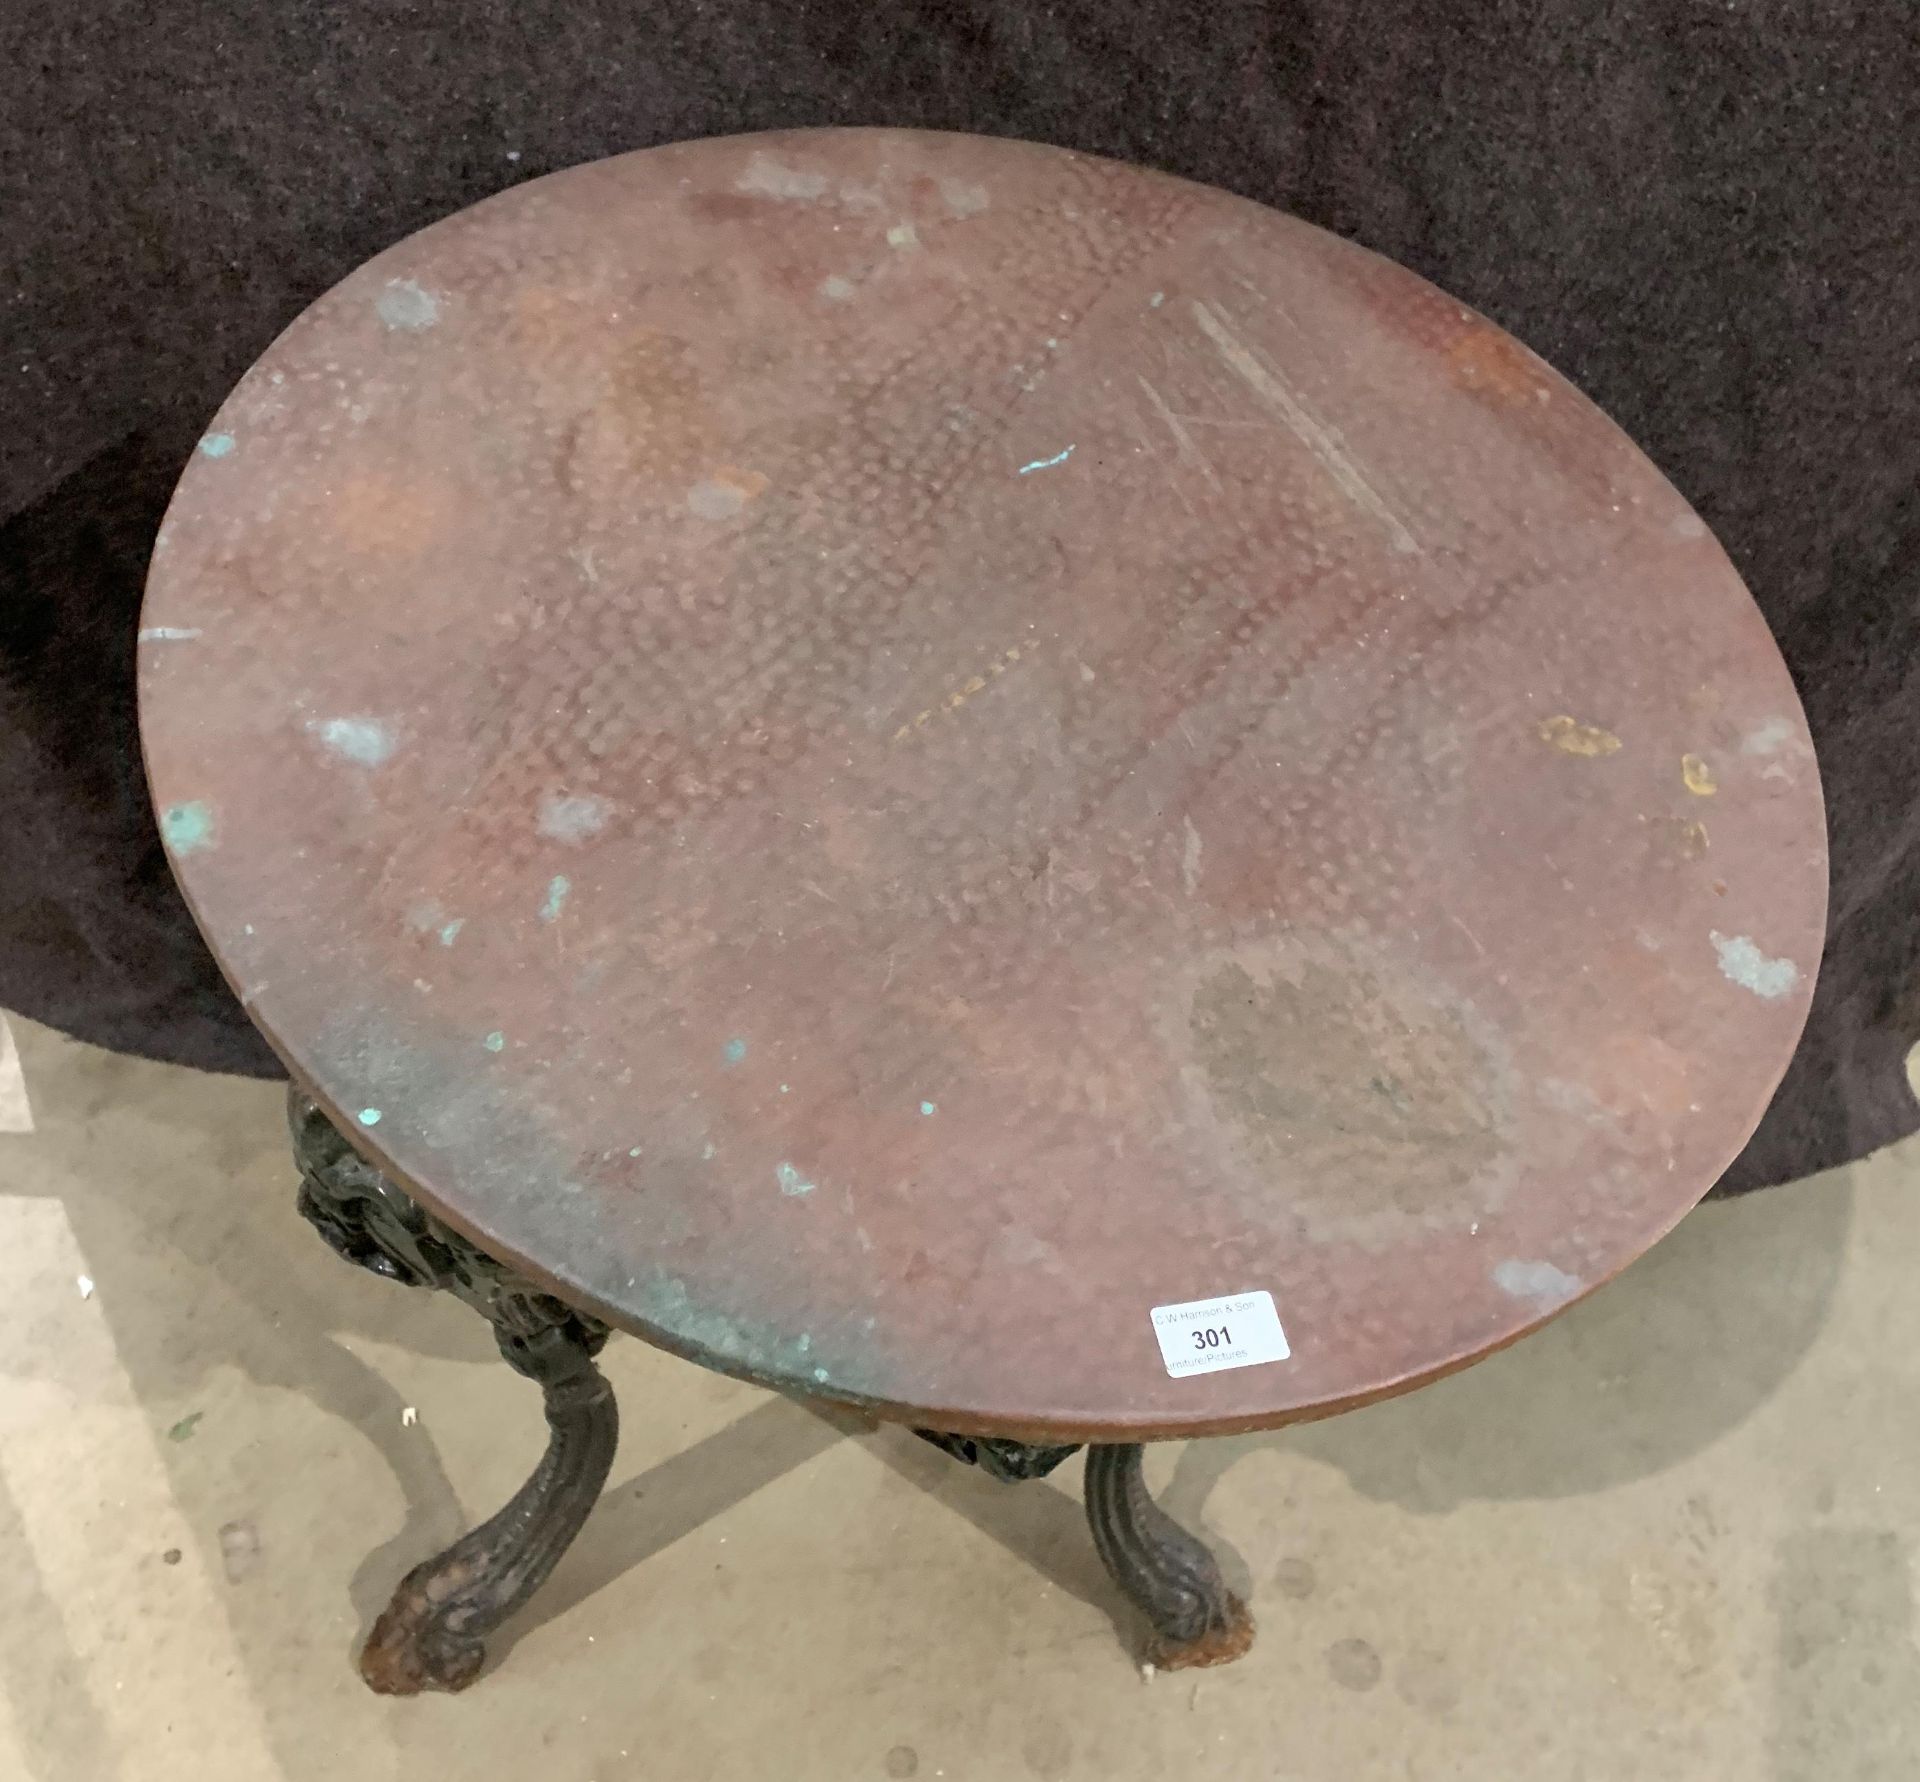 A Kings and Queens cast metal pub table with circular copper top 61cm diameter - Image 3 of 3